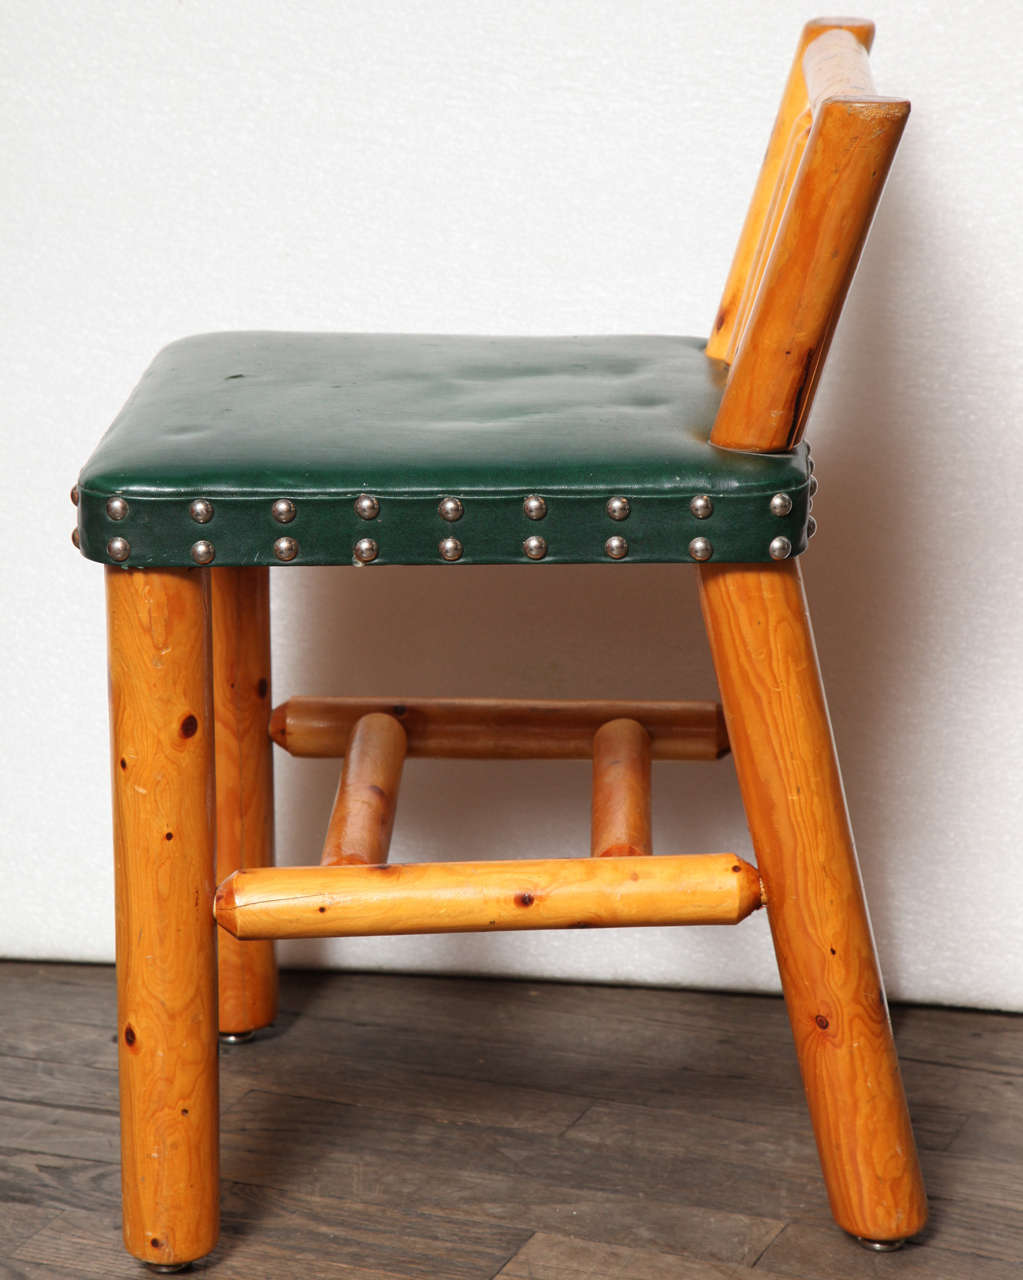 20th Century Small Stool Chair in the Style of Molesworth